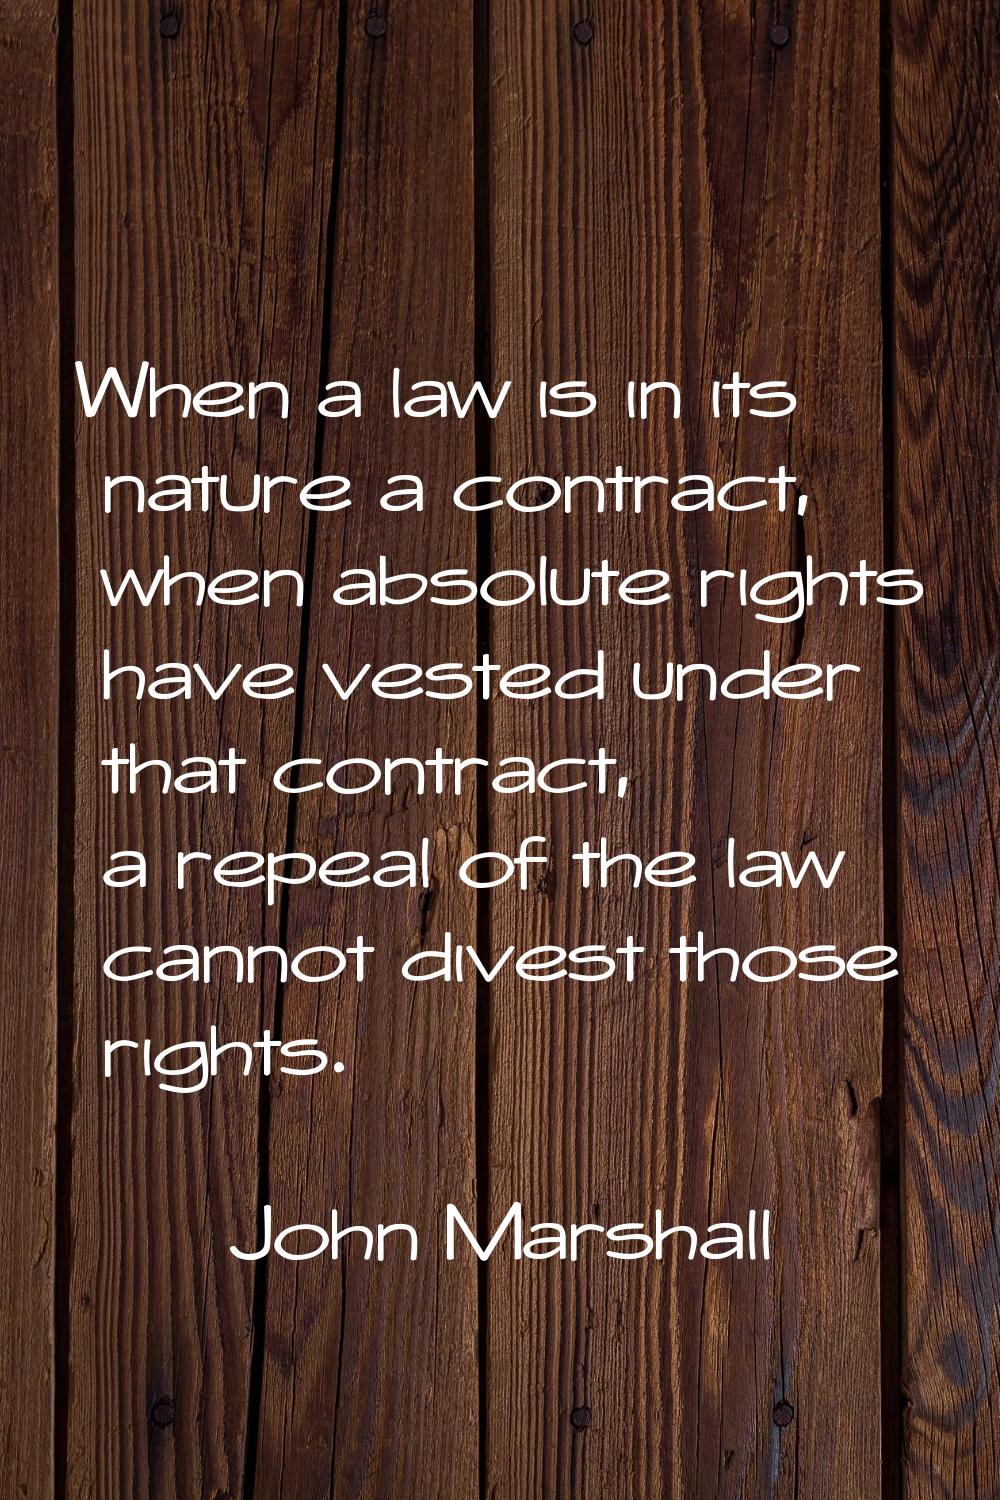 When a law is in its nature a contract, when absolute rights have vested under that contract, a rep